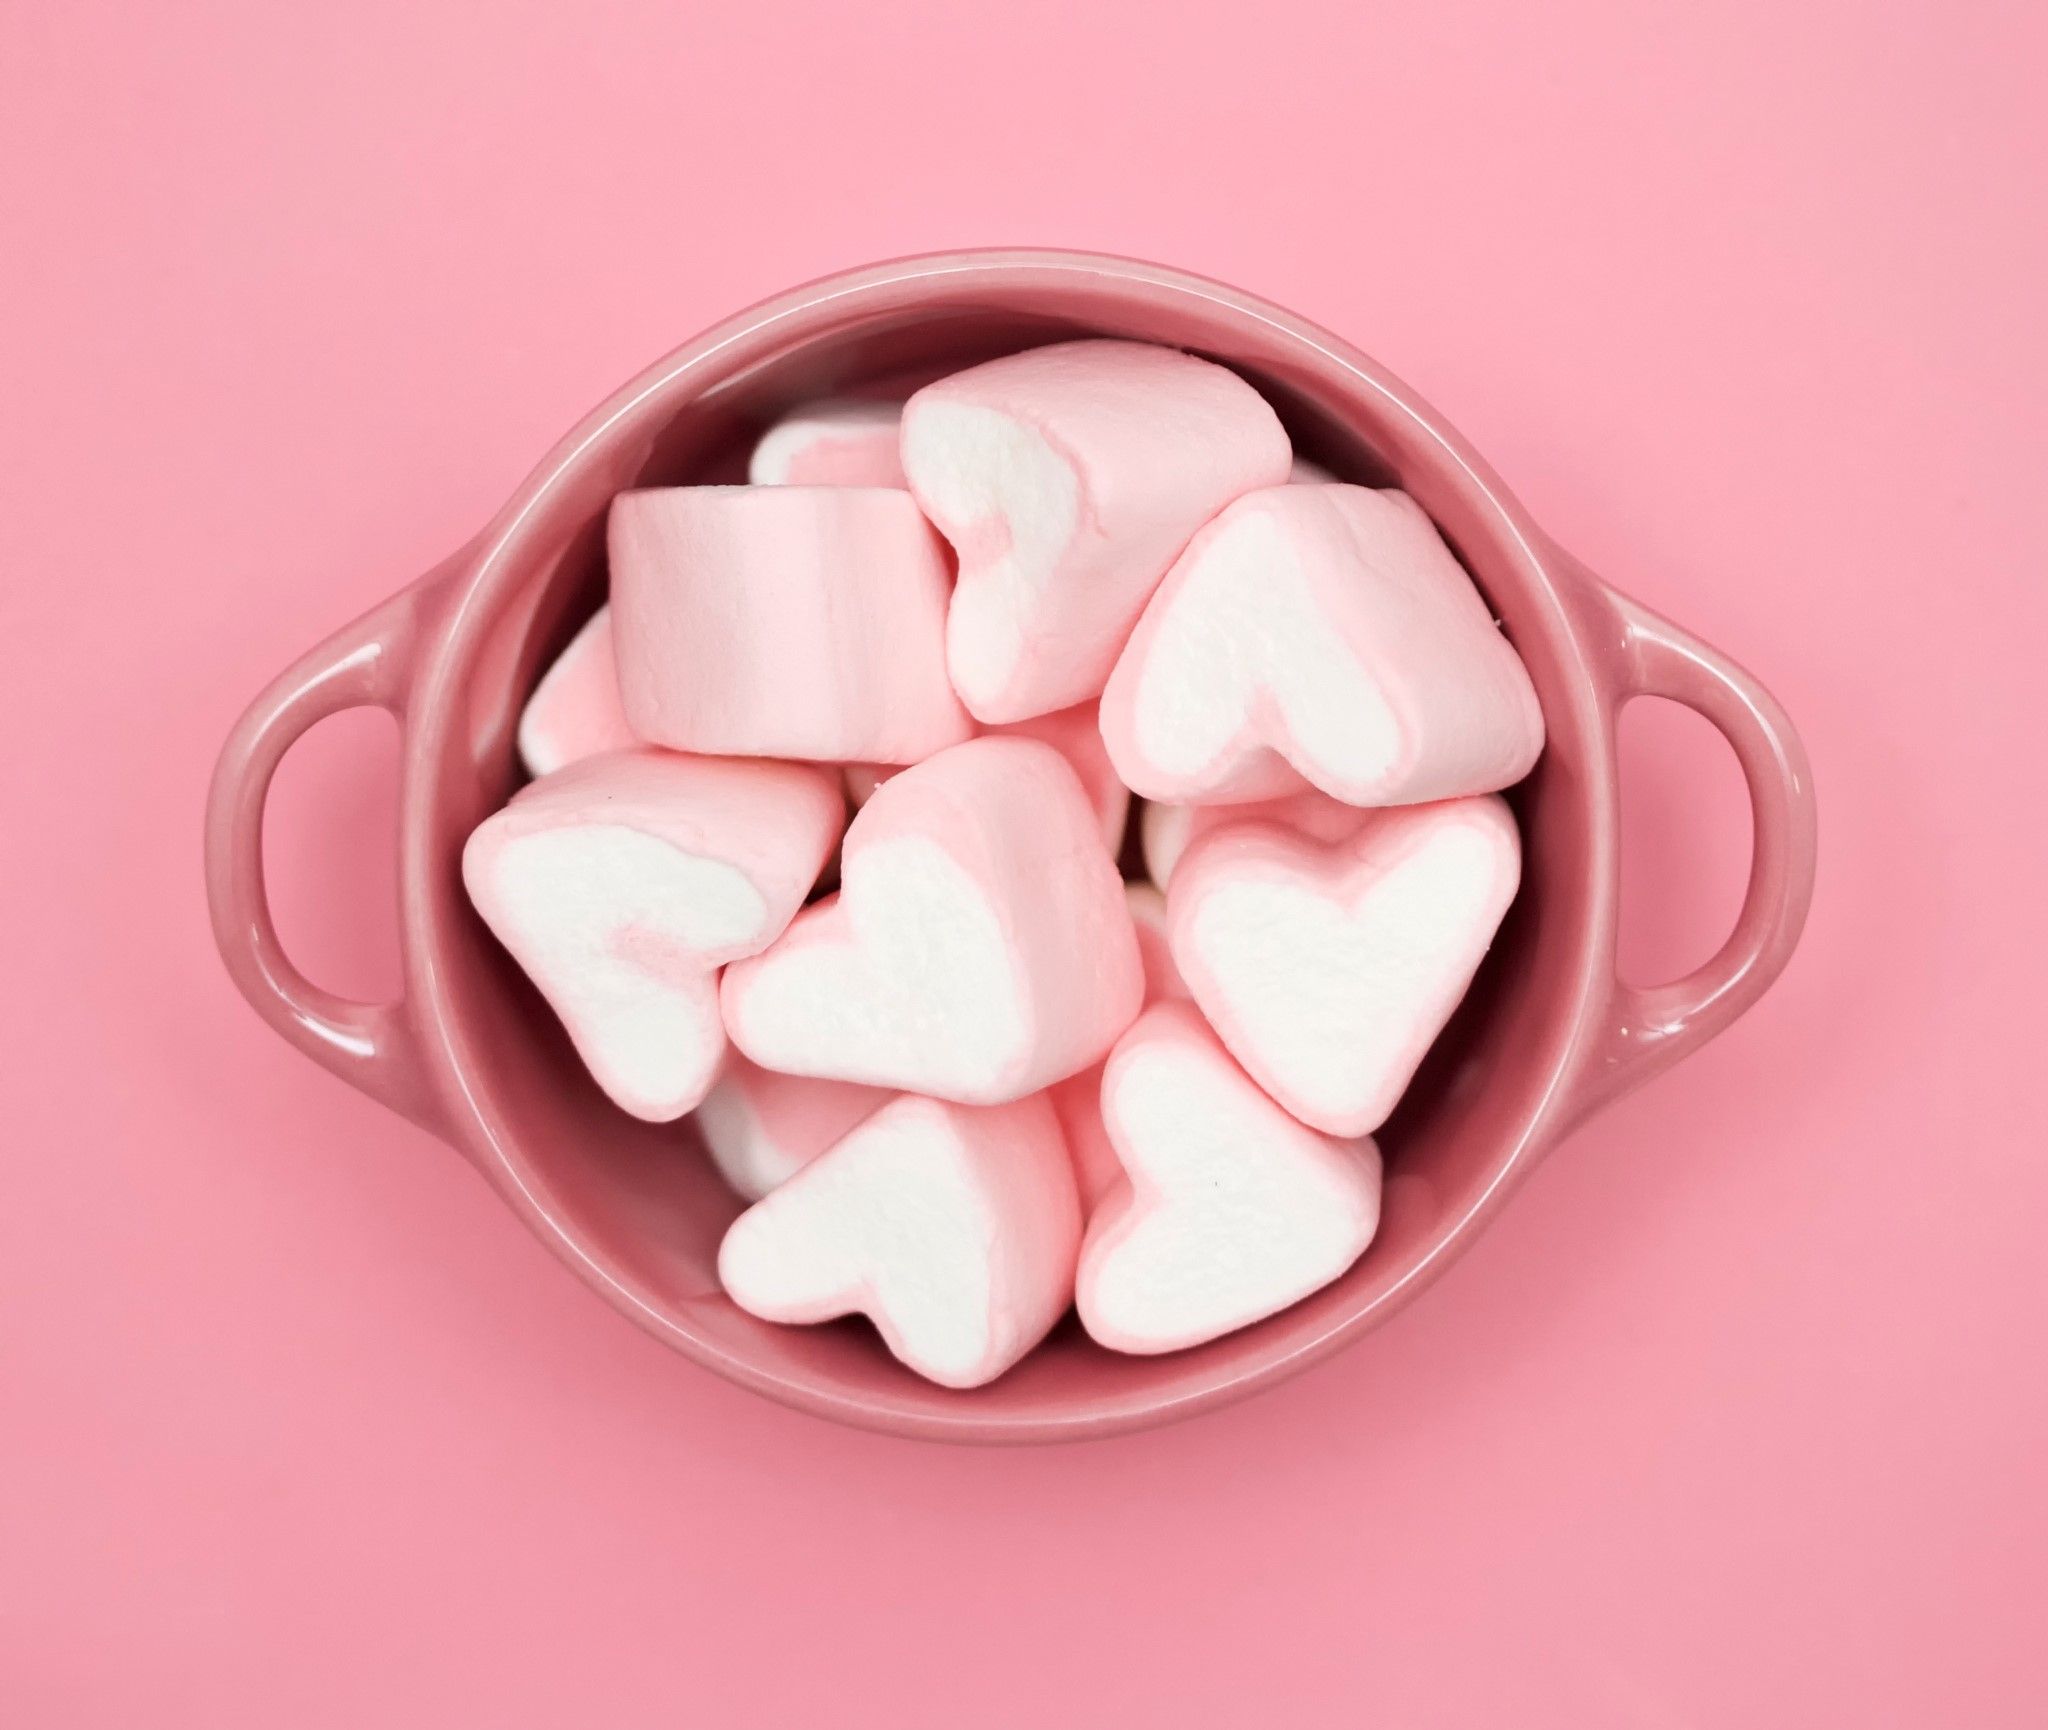 Candy, Closeup, Sweets, Pink color, Heart, Cup Gallery HD Wallpaper